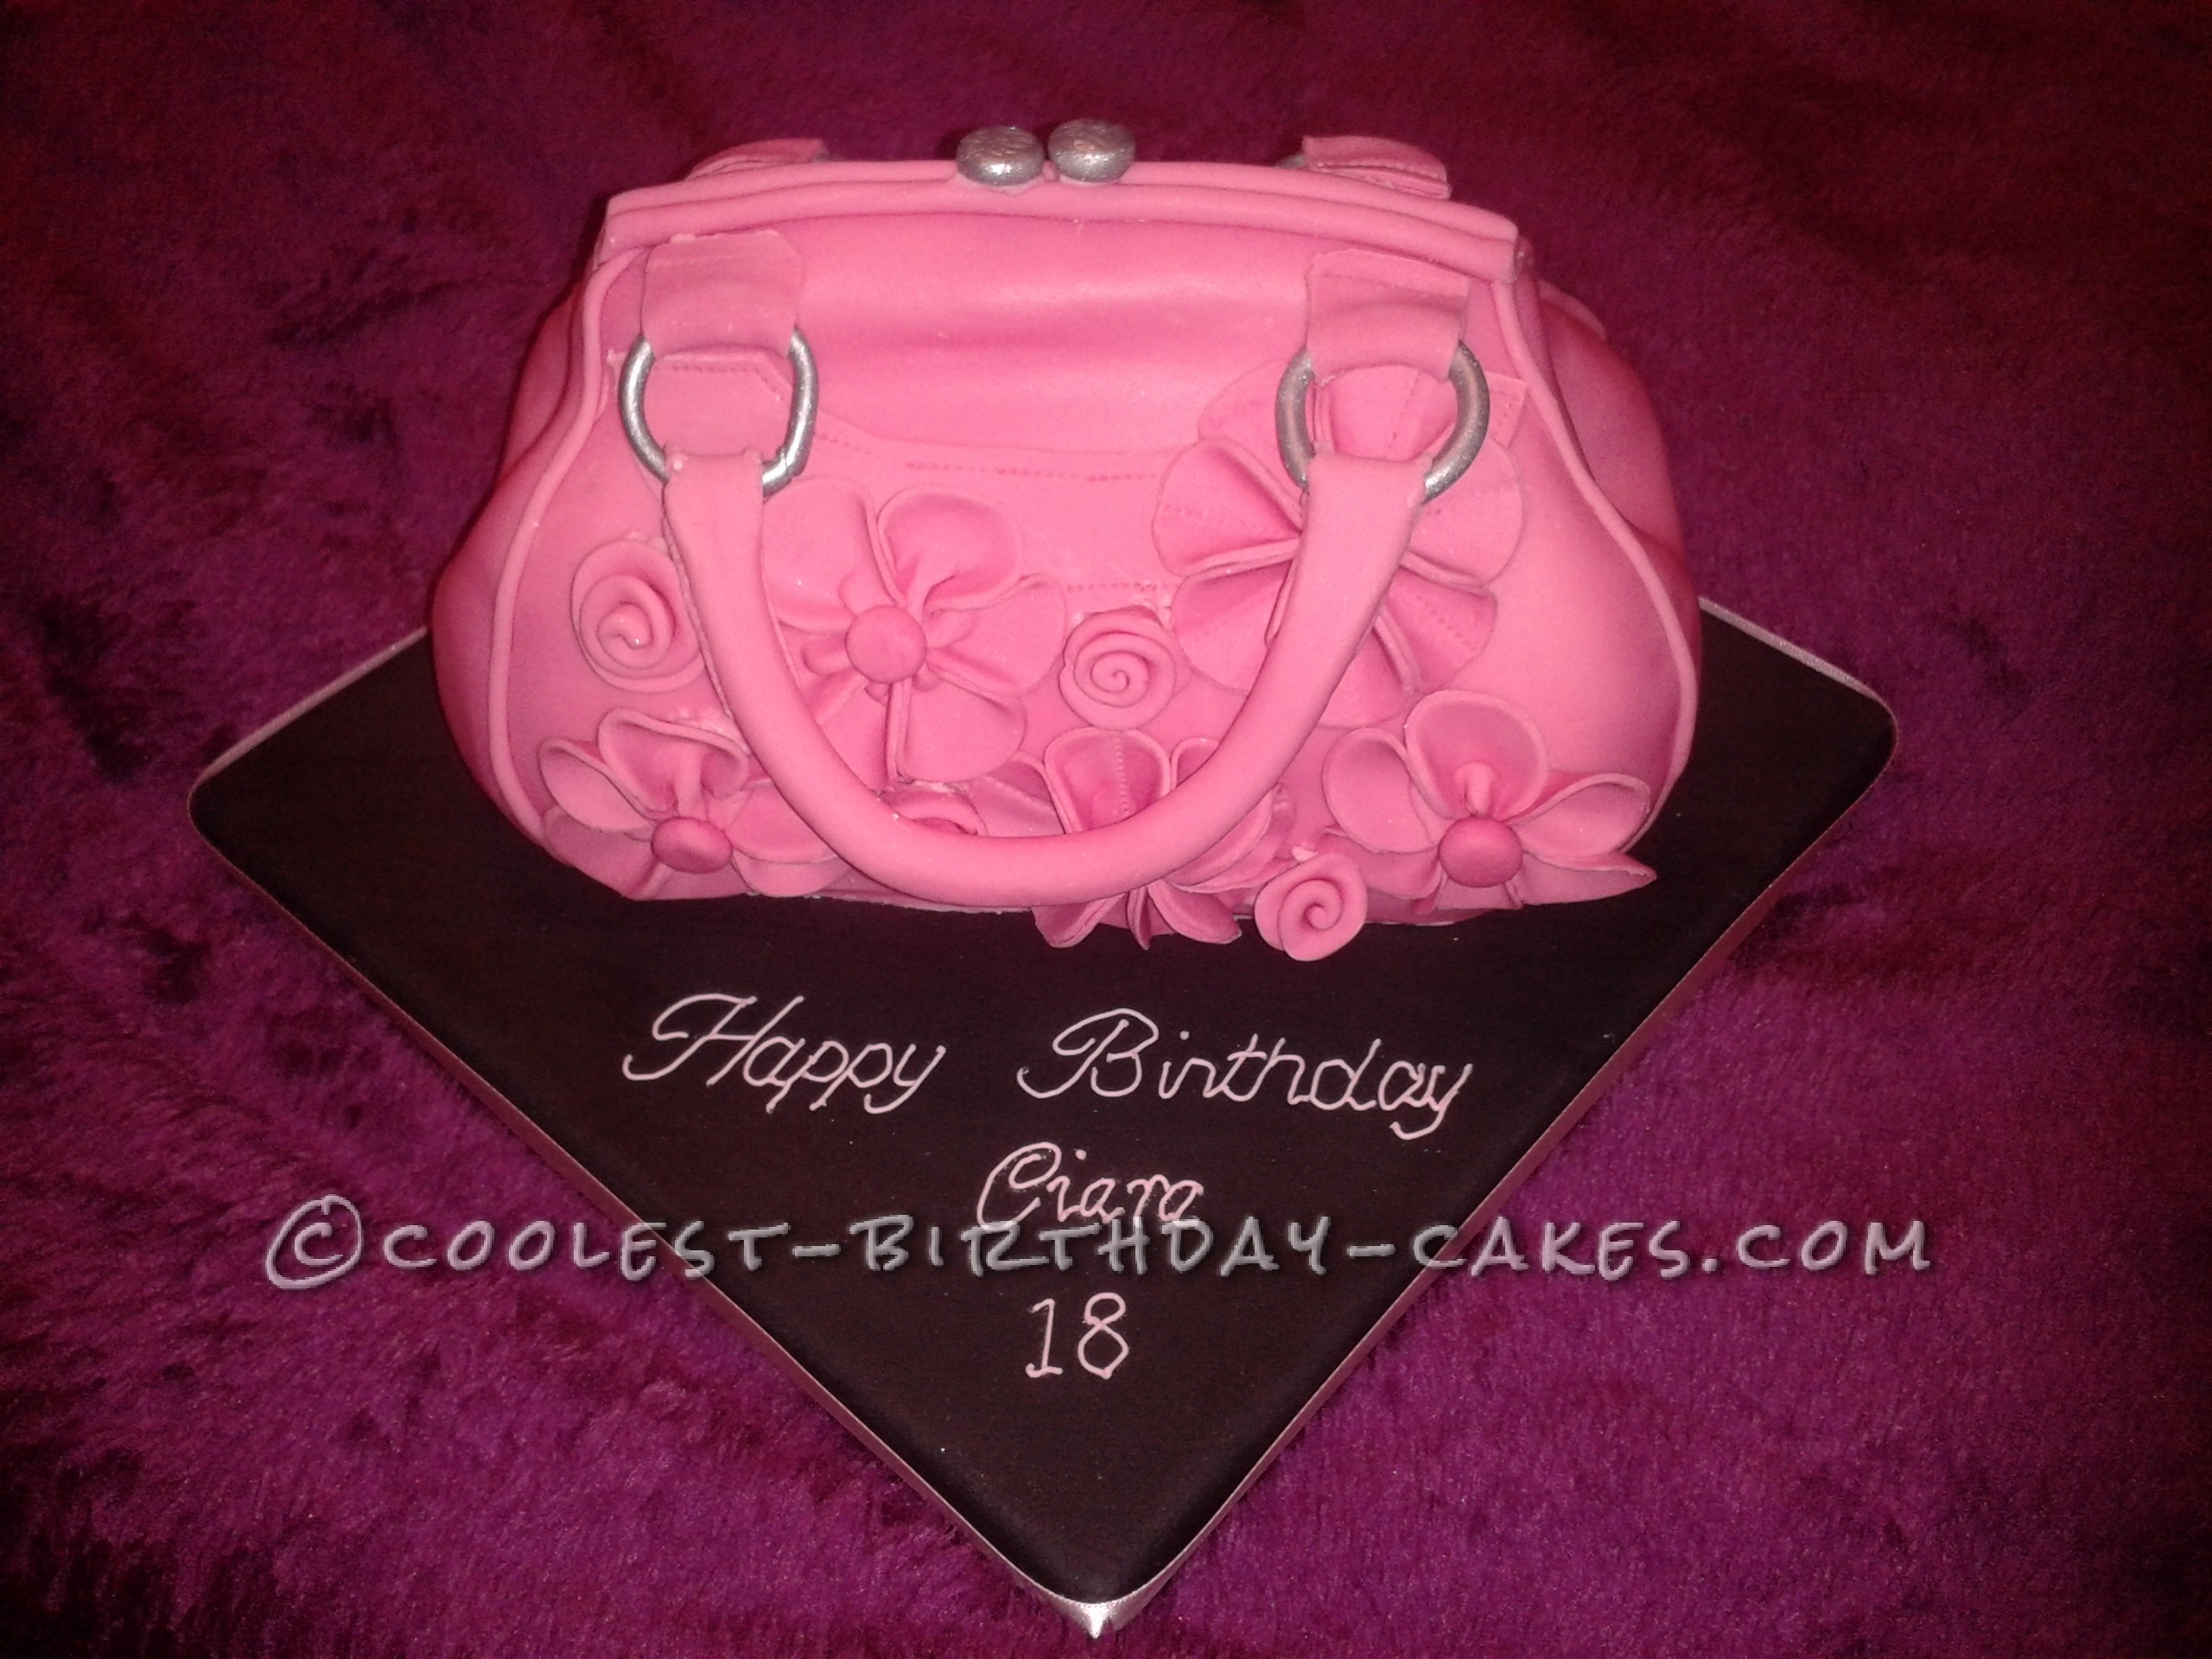 Chanel Bag Cake by Rich Real | Amazing Cake Ideas | Flickr